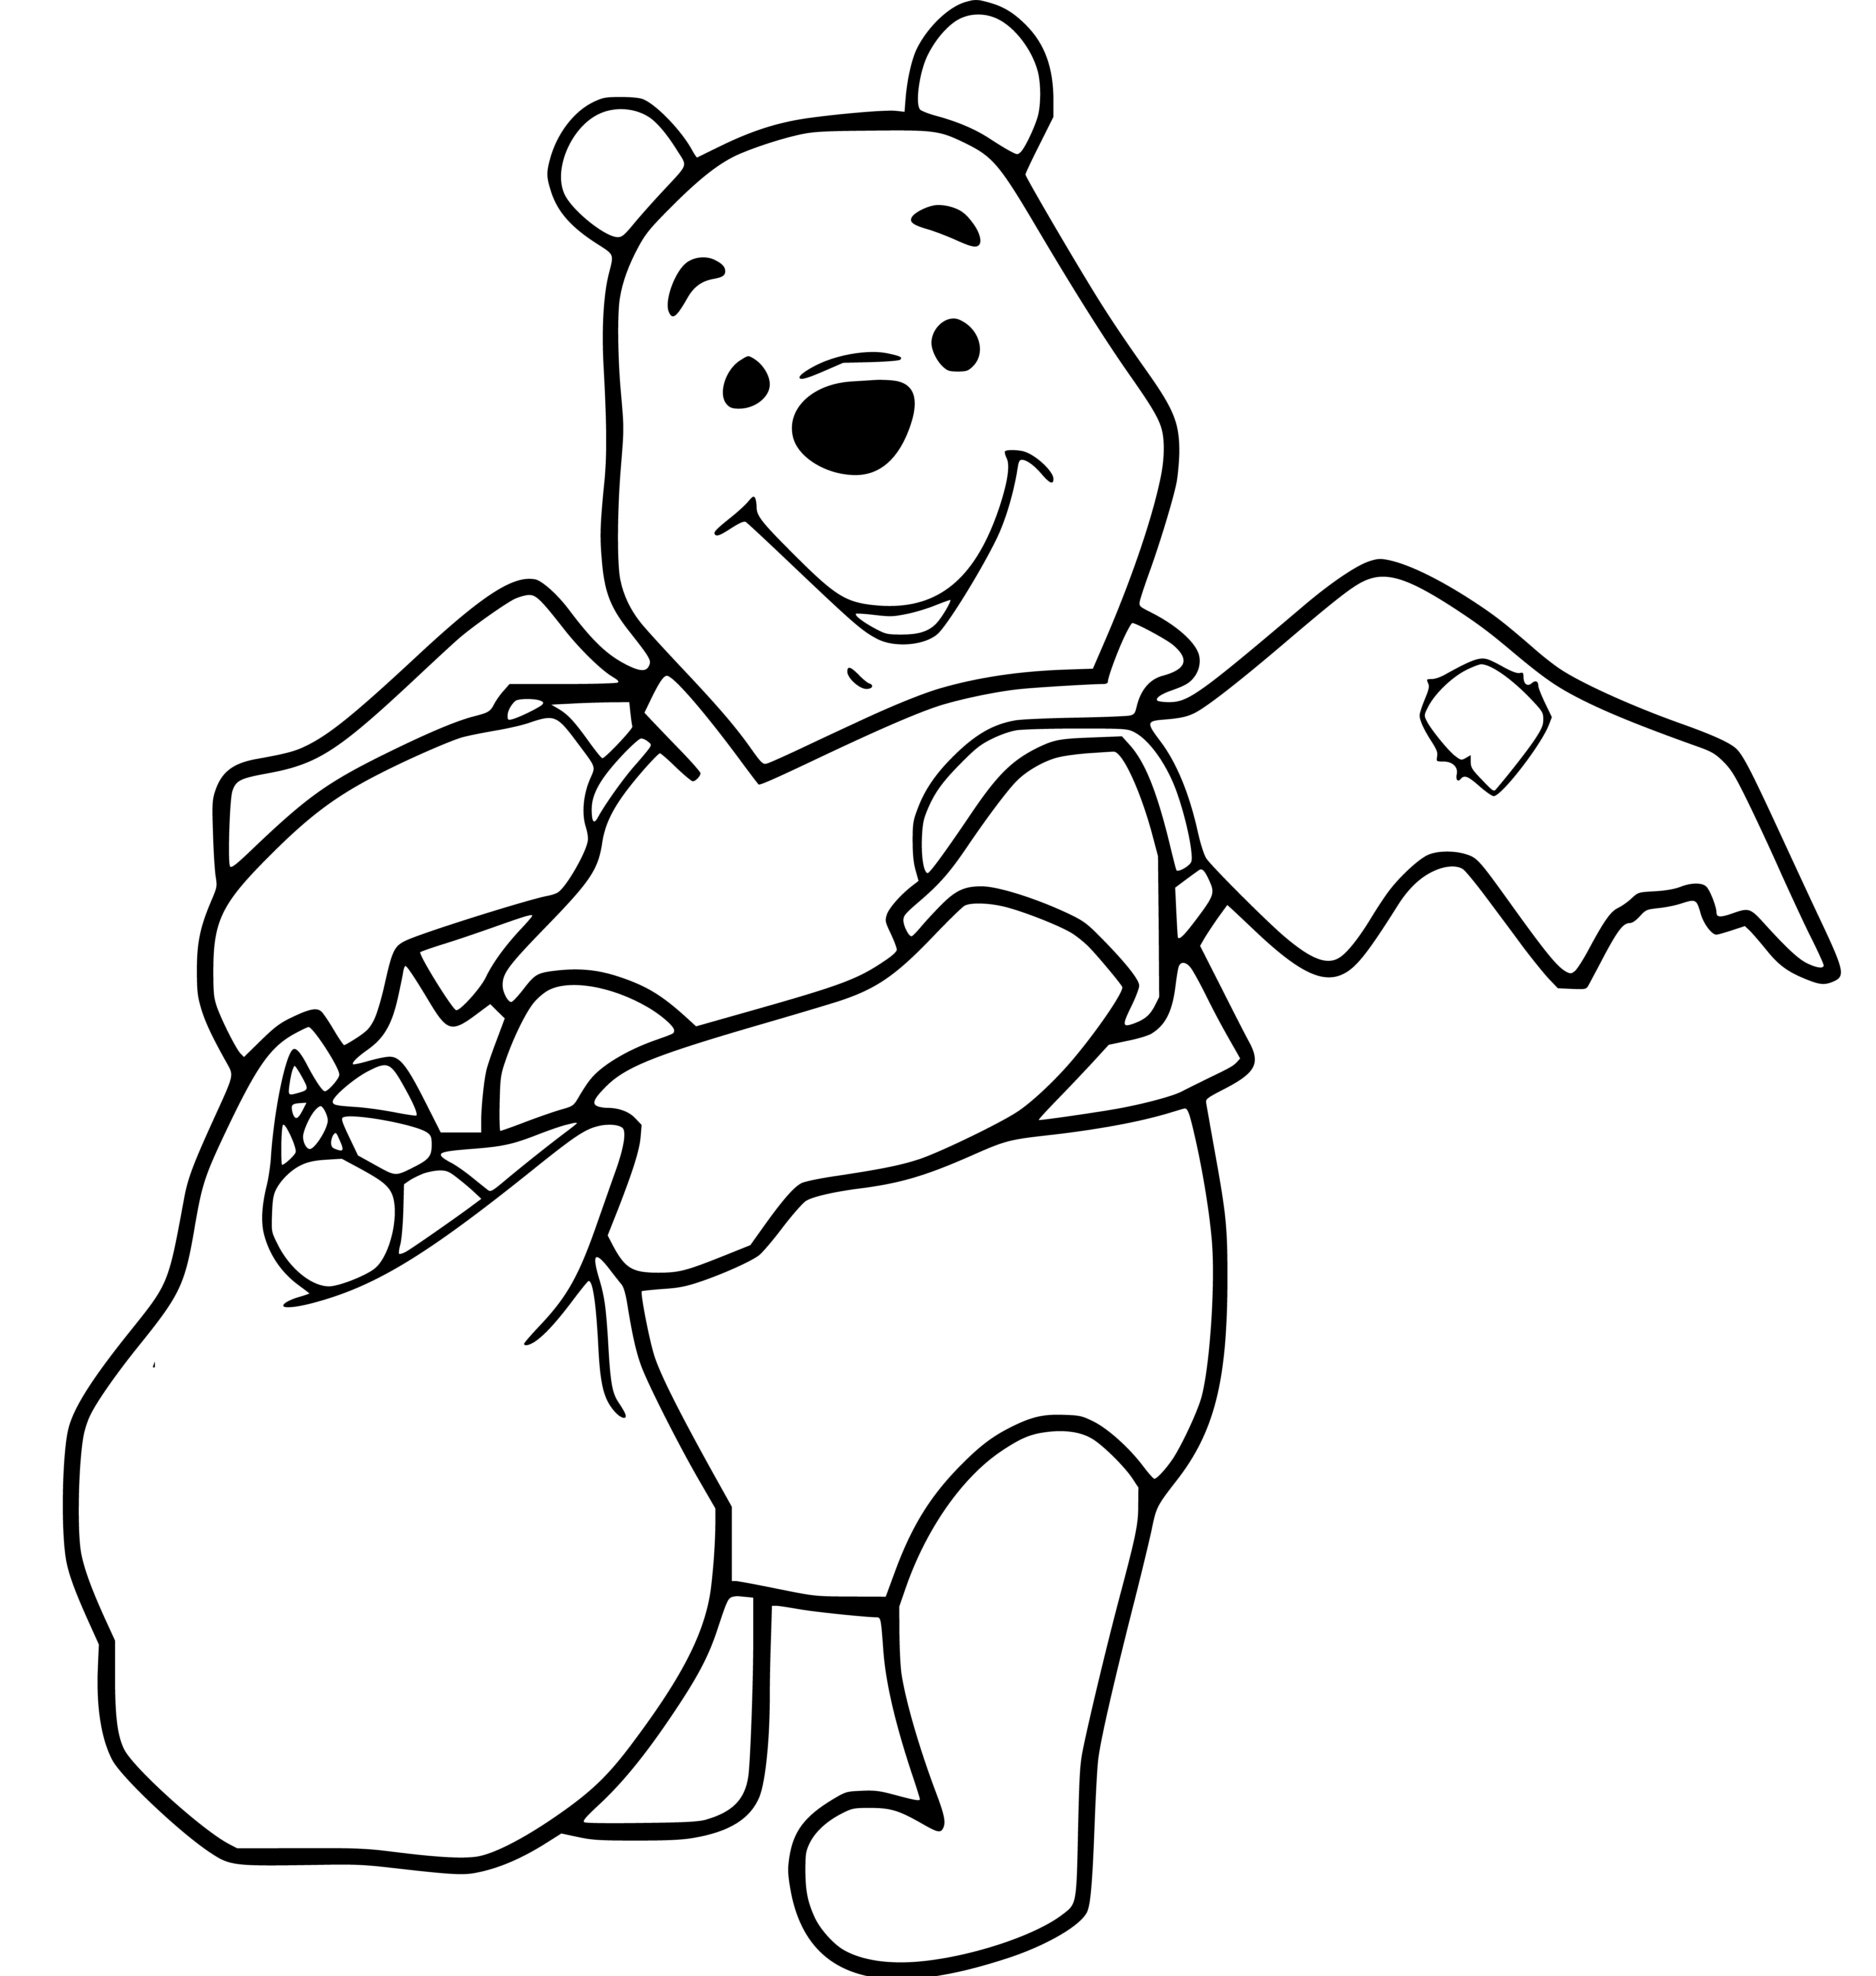 Winnie The Pooh Easter Holiday Coloring Page for Kids - SheetalColor.com